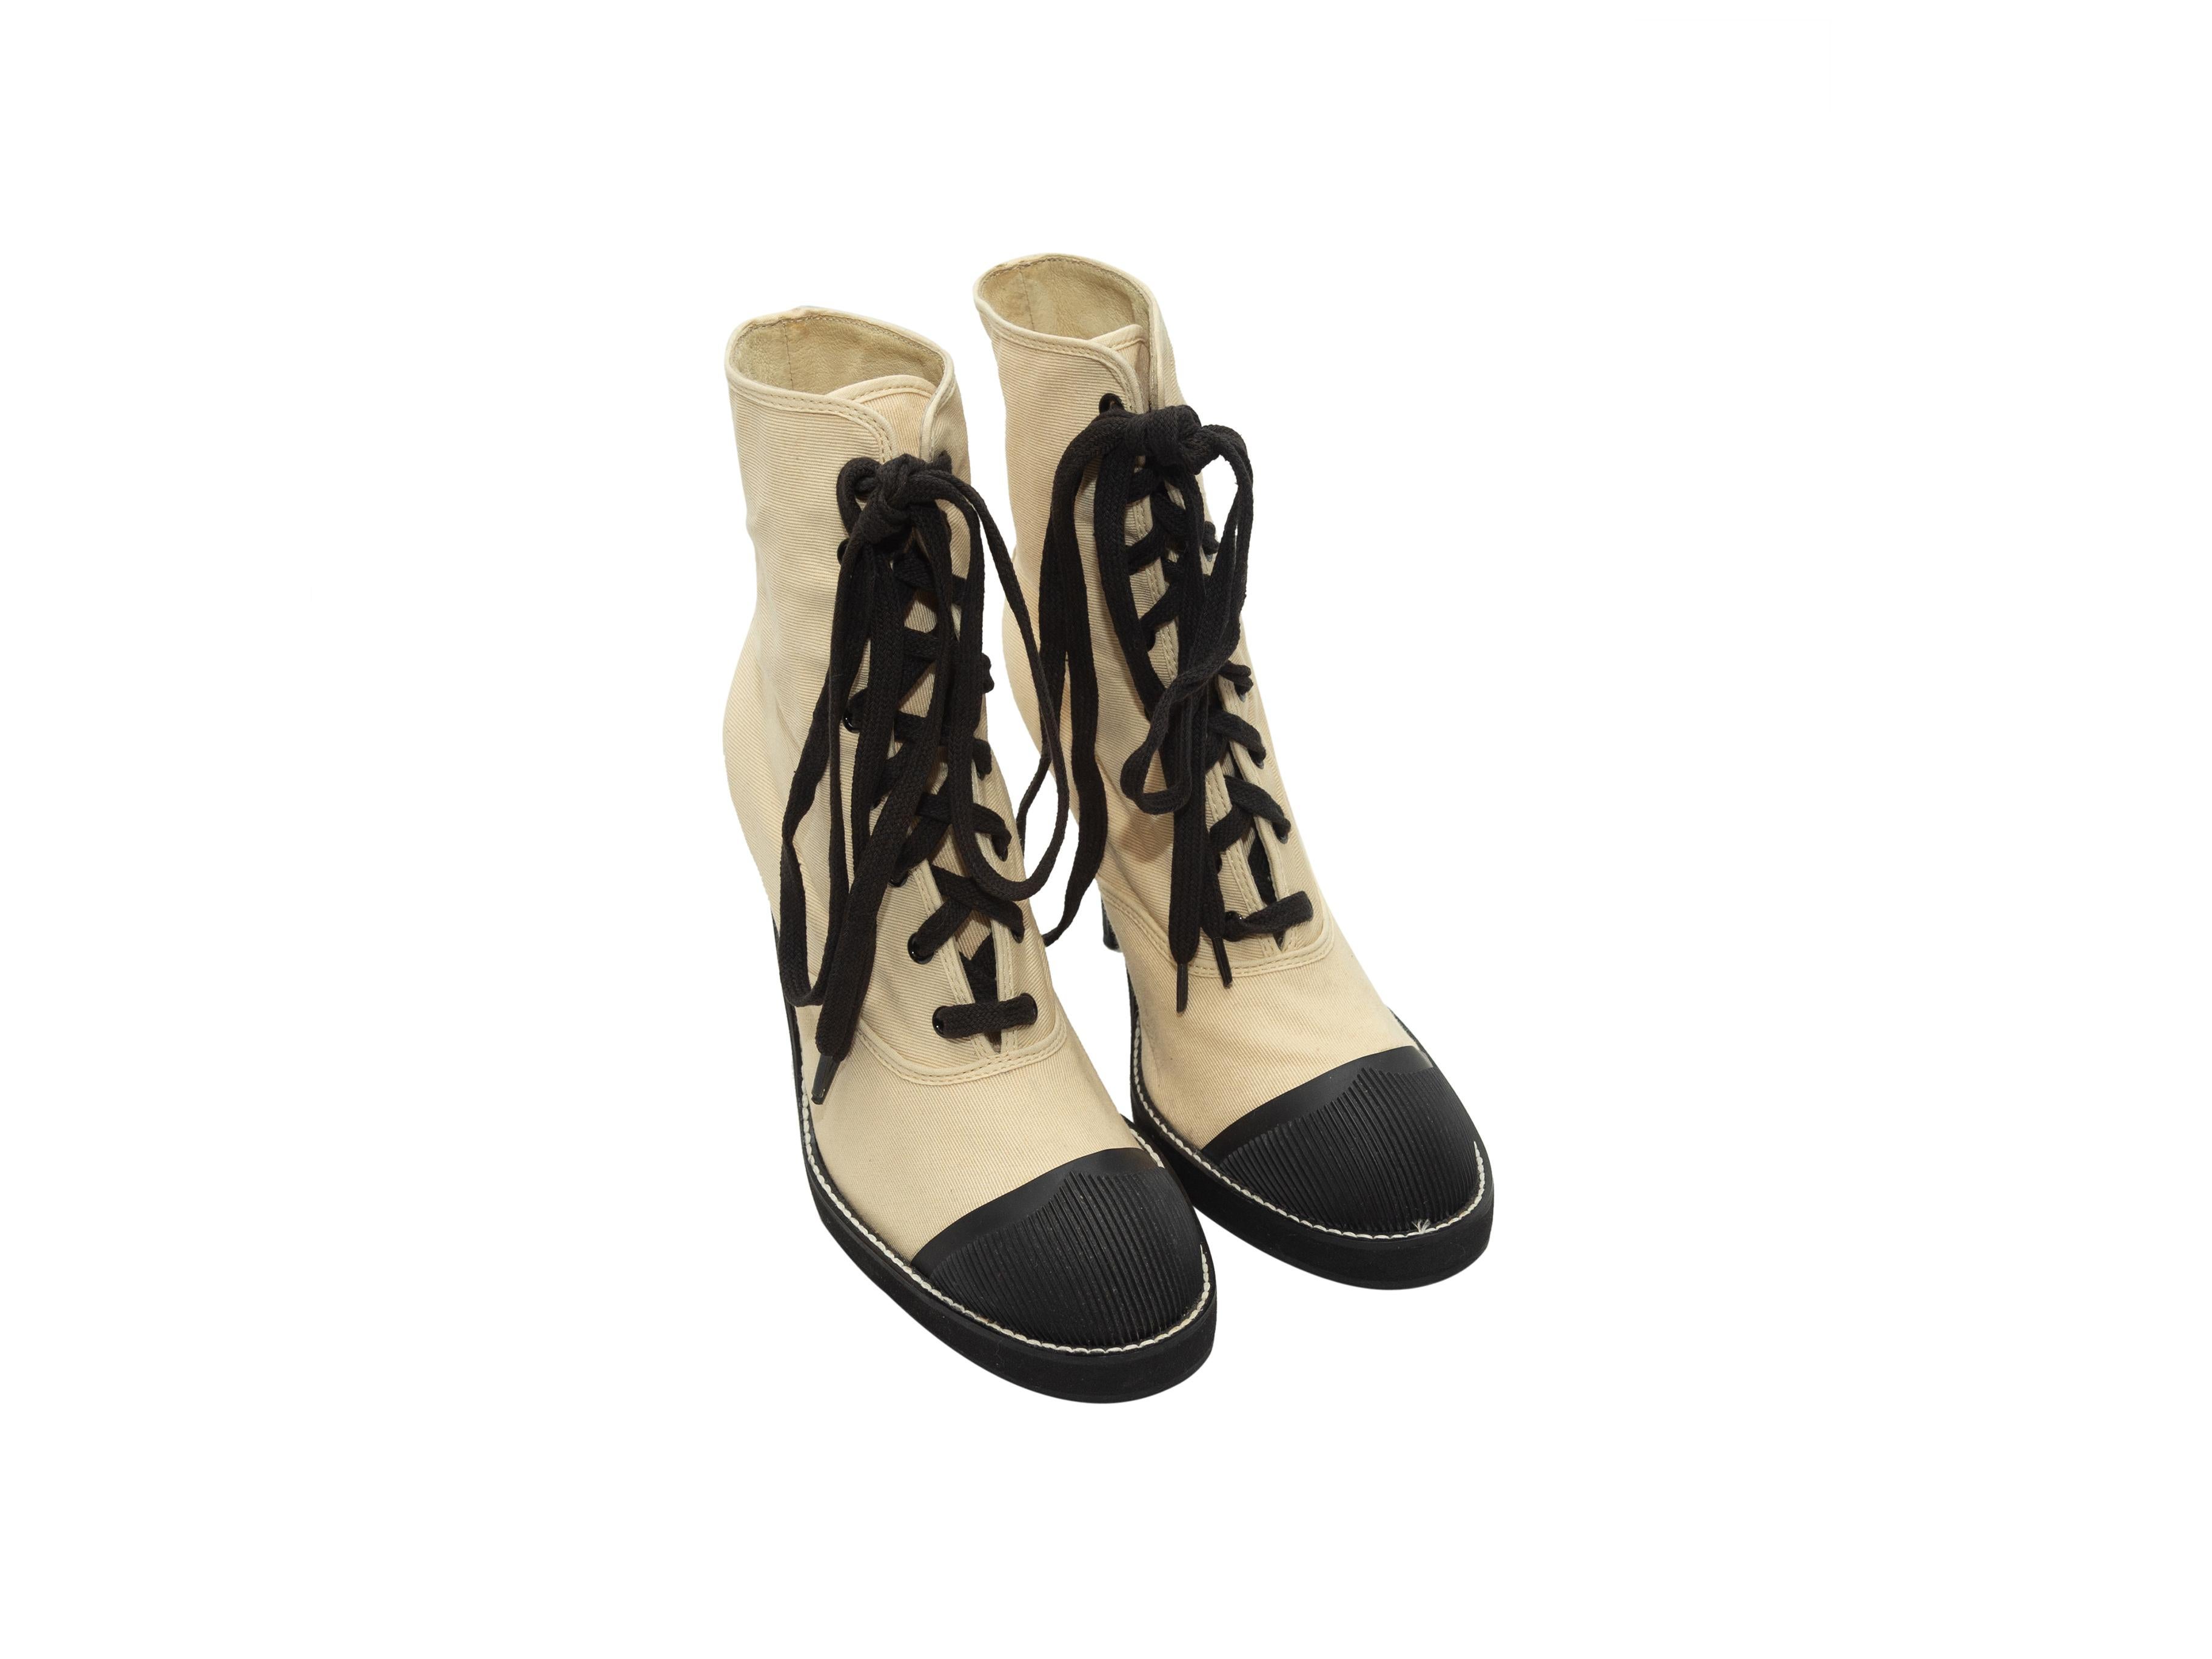 Product details: Vintage cream canvas and black rubber cap-toe booties by Junior Gaultier. Stacked heels. Lace-up tie closures at tops. Designer size 37. 4